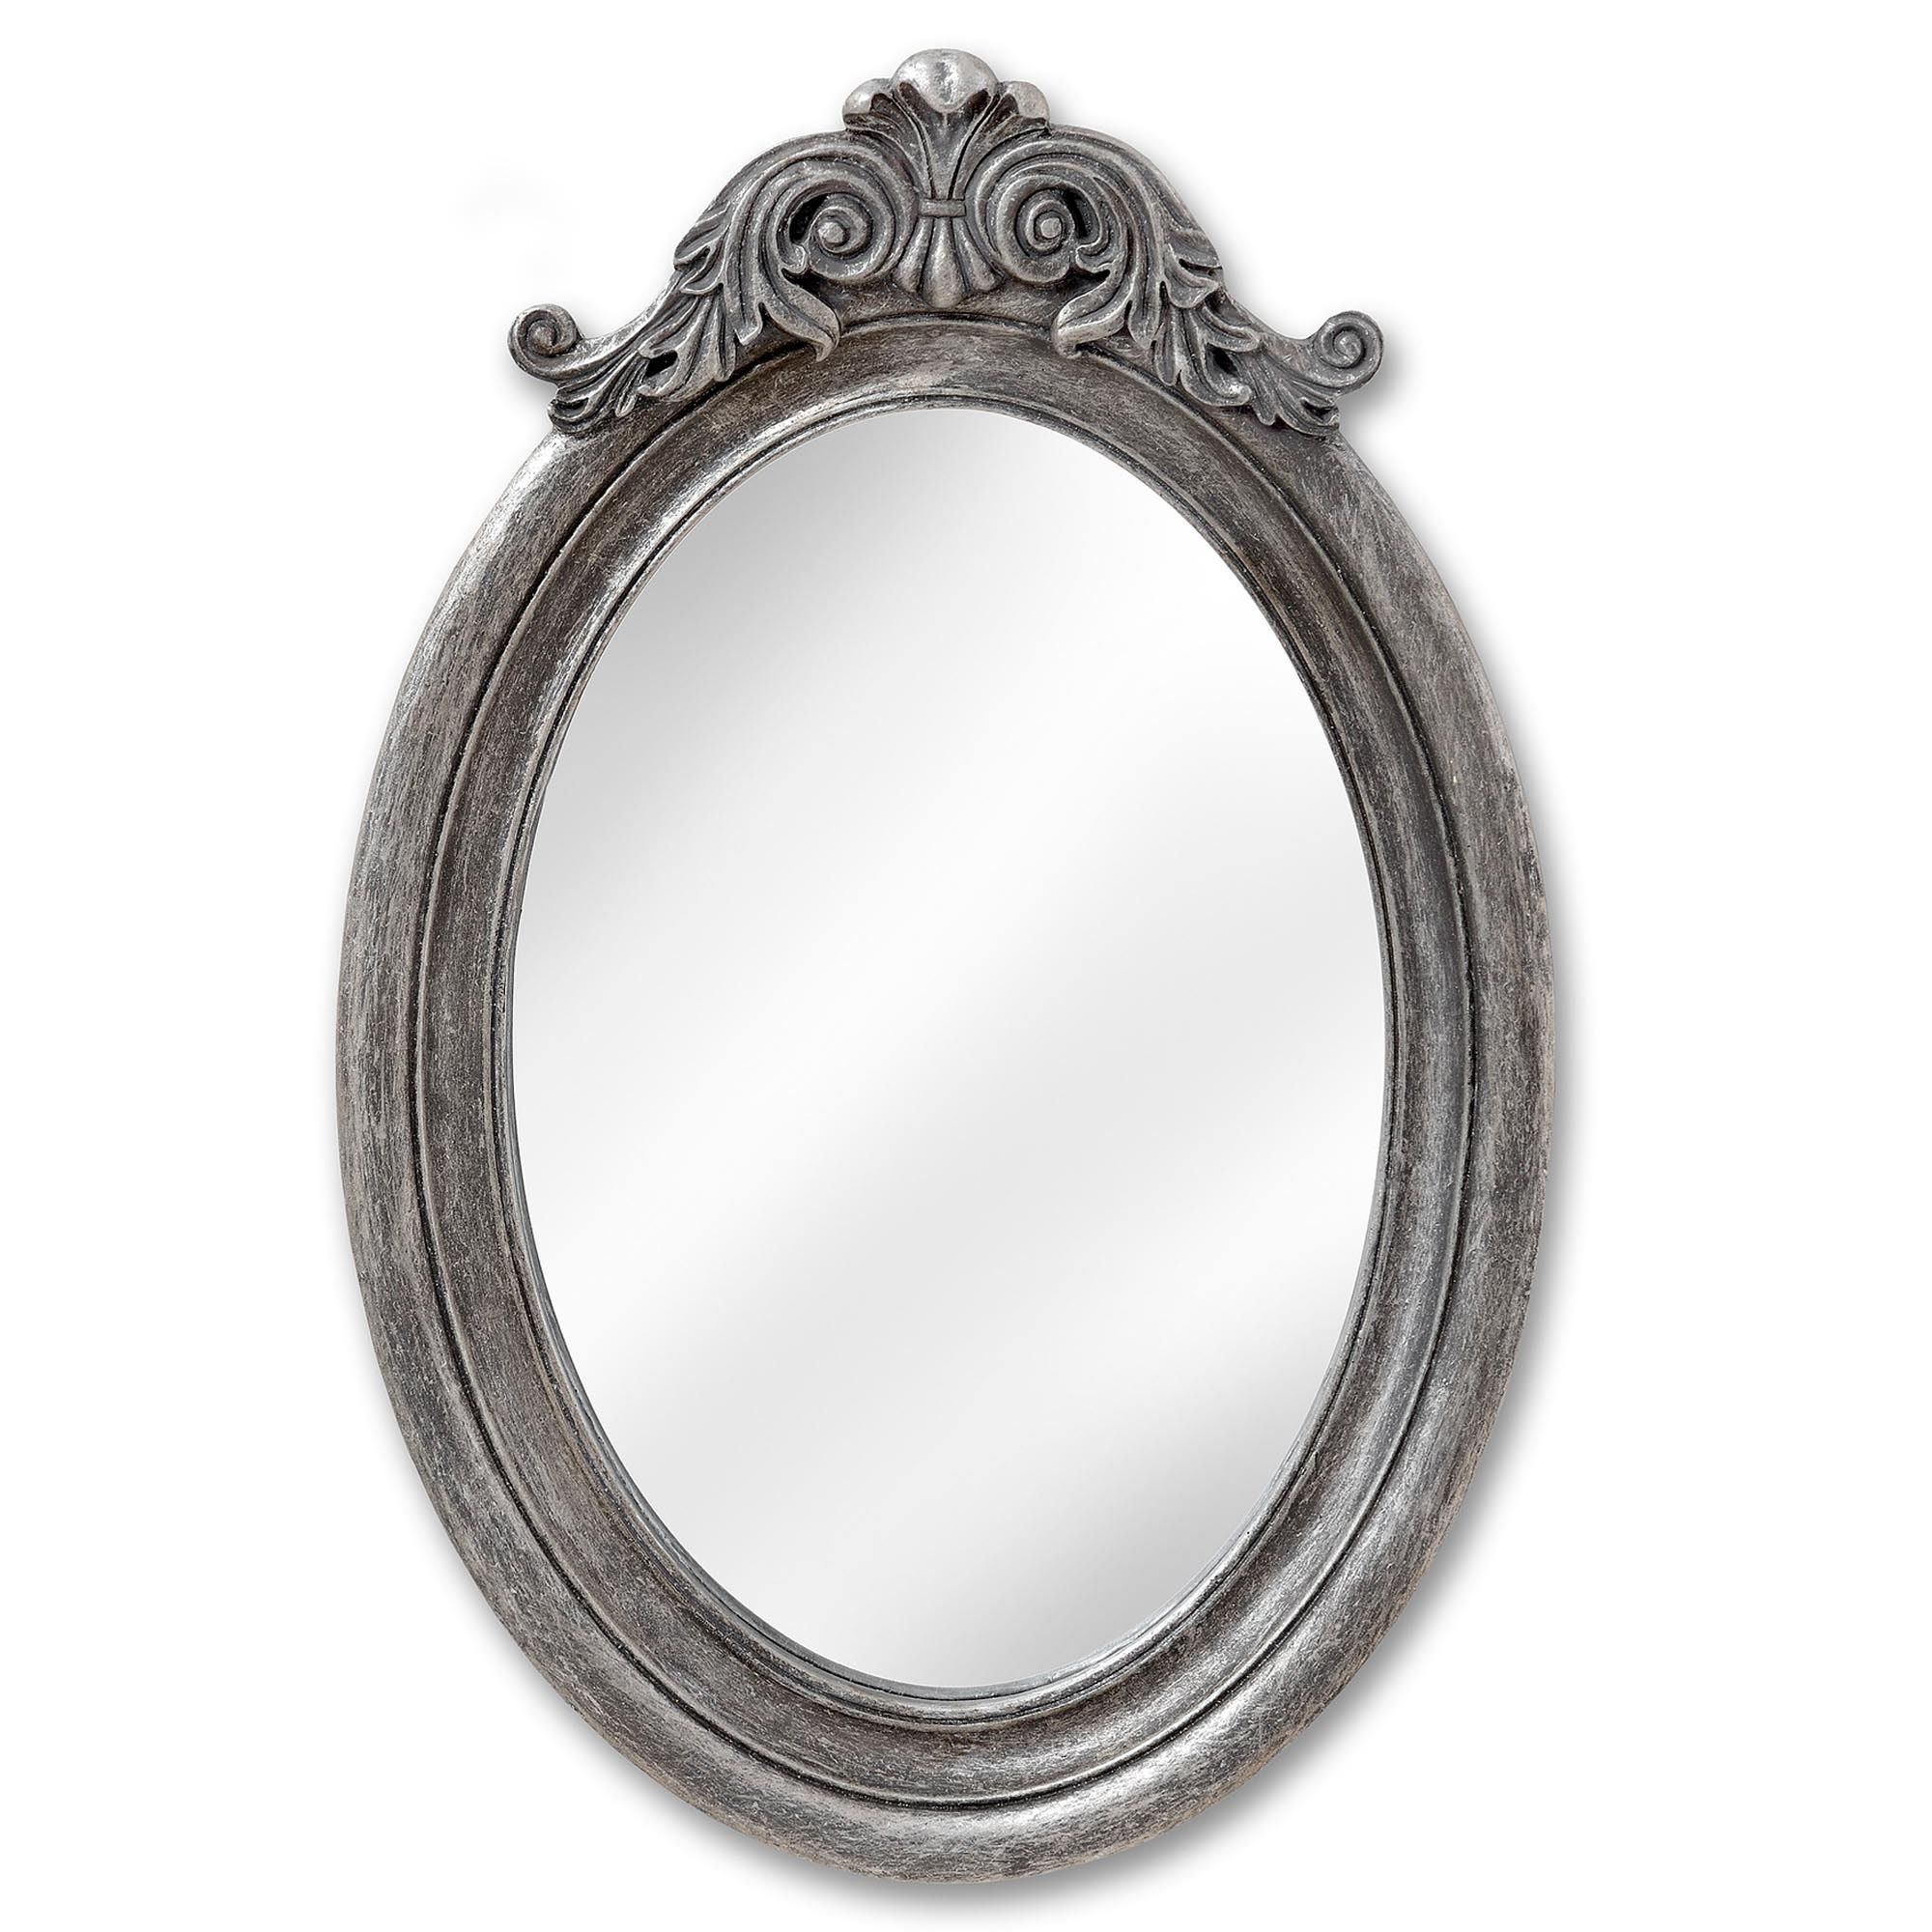 Antique French Style Silver Oval Wall Mirror | Homesdirect365 Inside Antiqued Silver Quatrefoil Wall Mirrors (View 7 of 15)